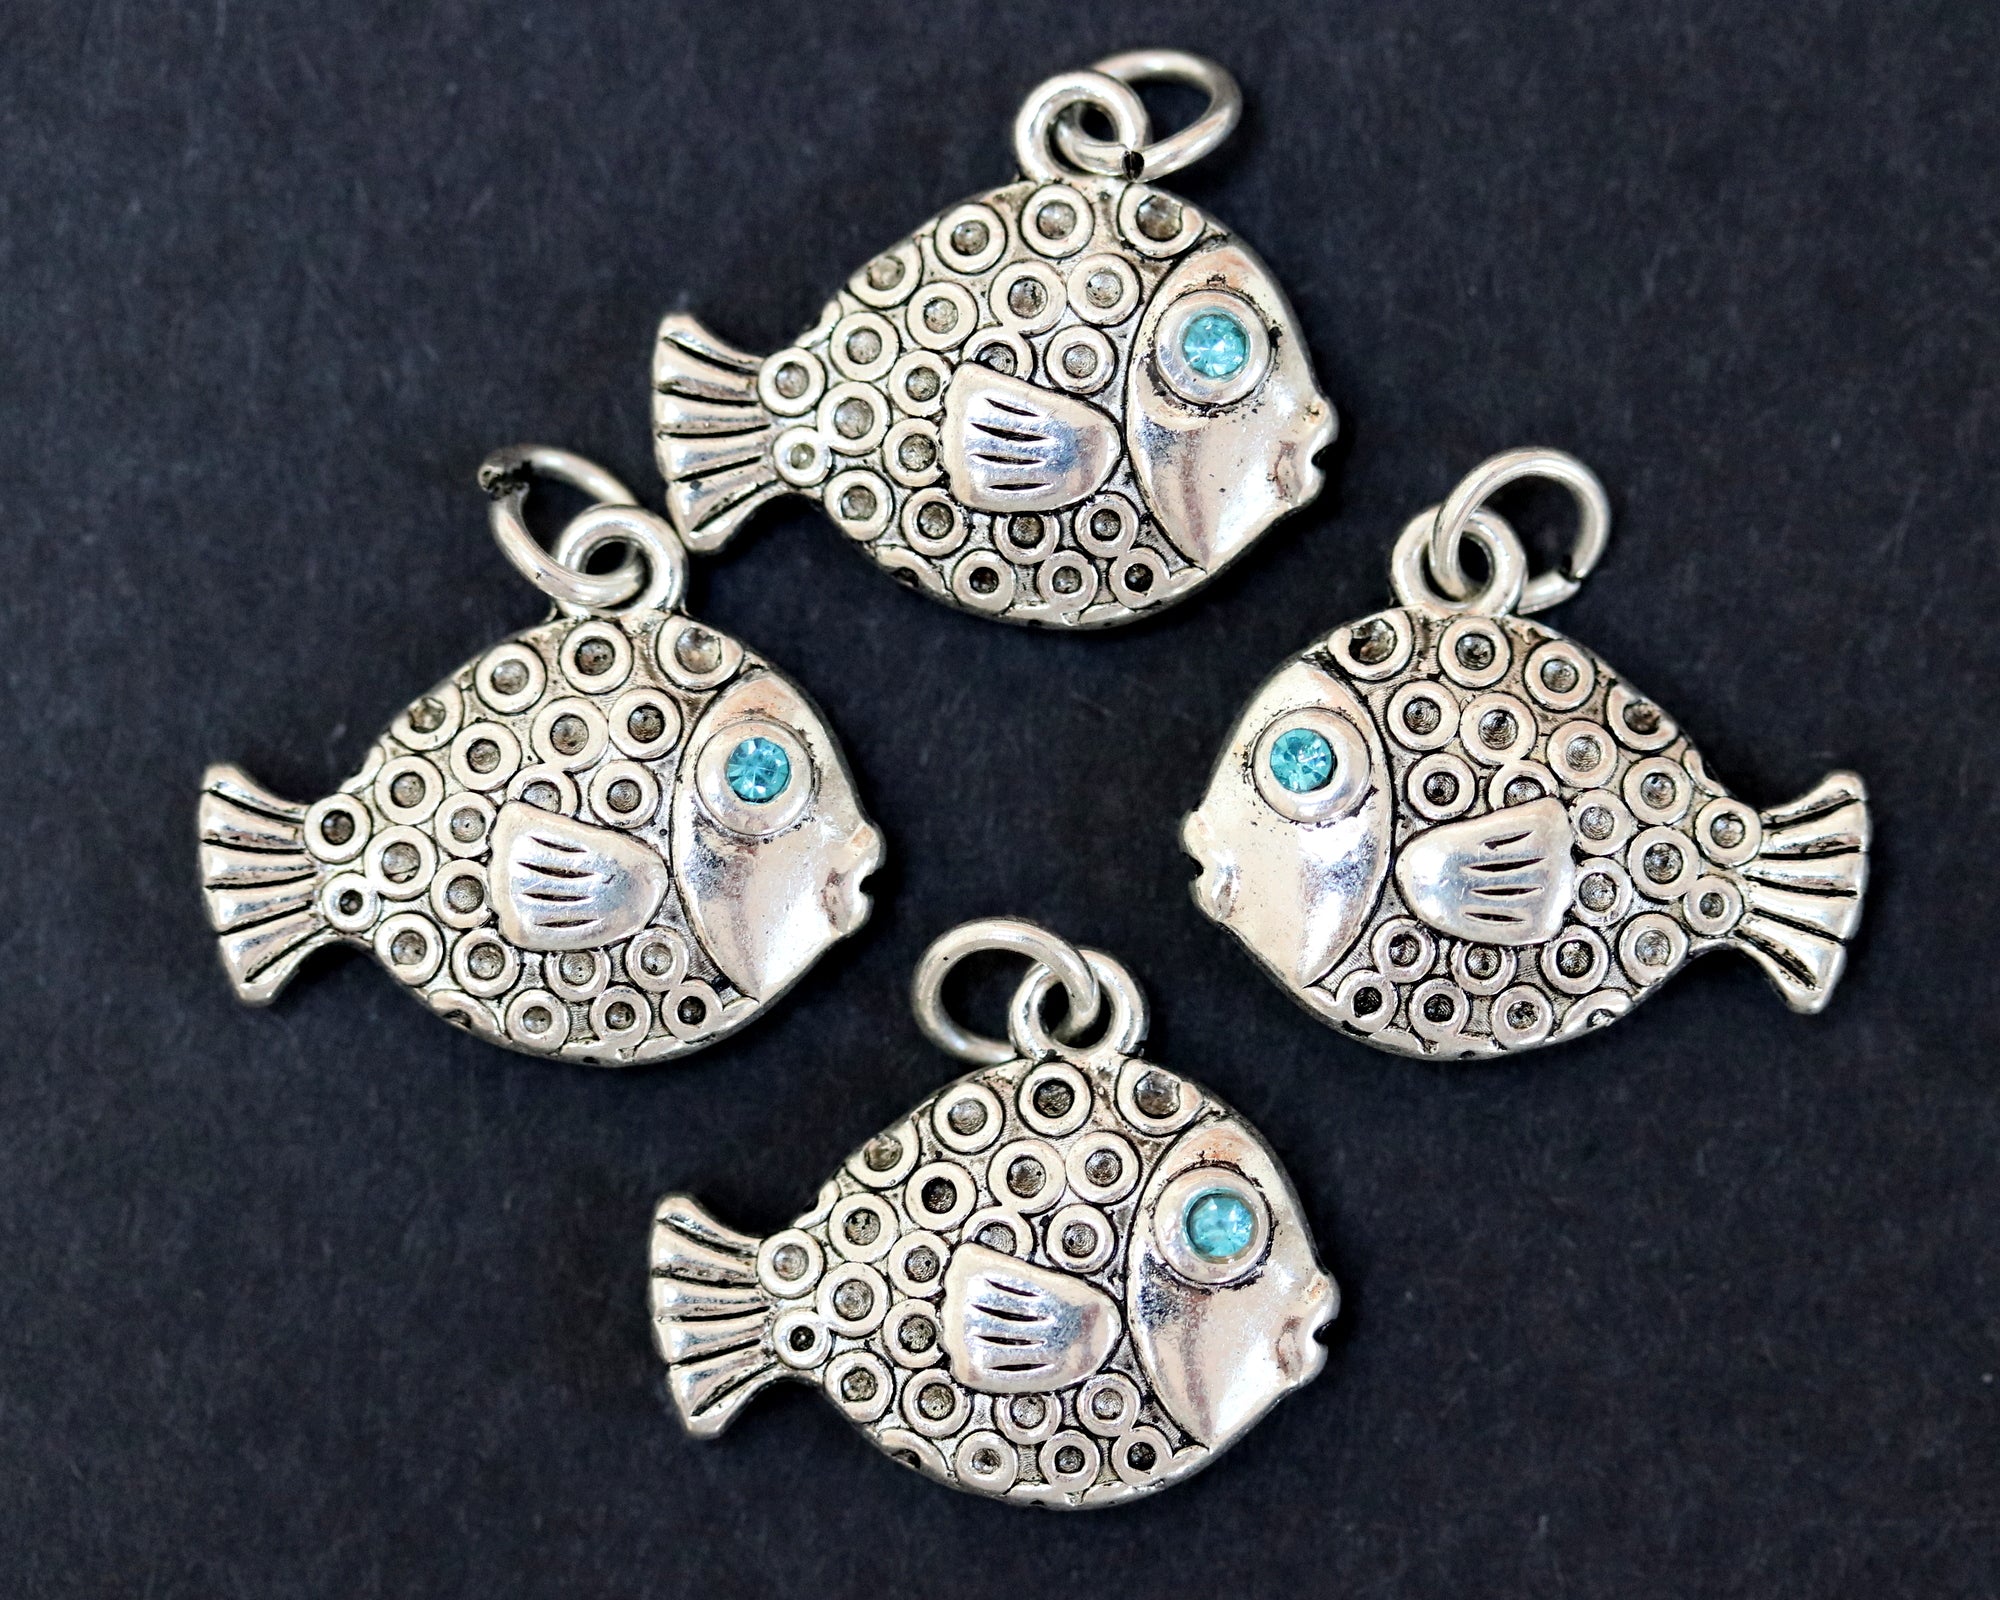 Fish charm 16x20mm antique silver plated metal alloy pendant